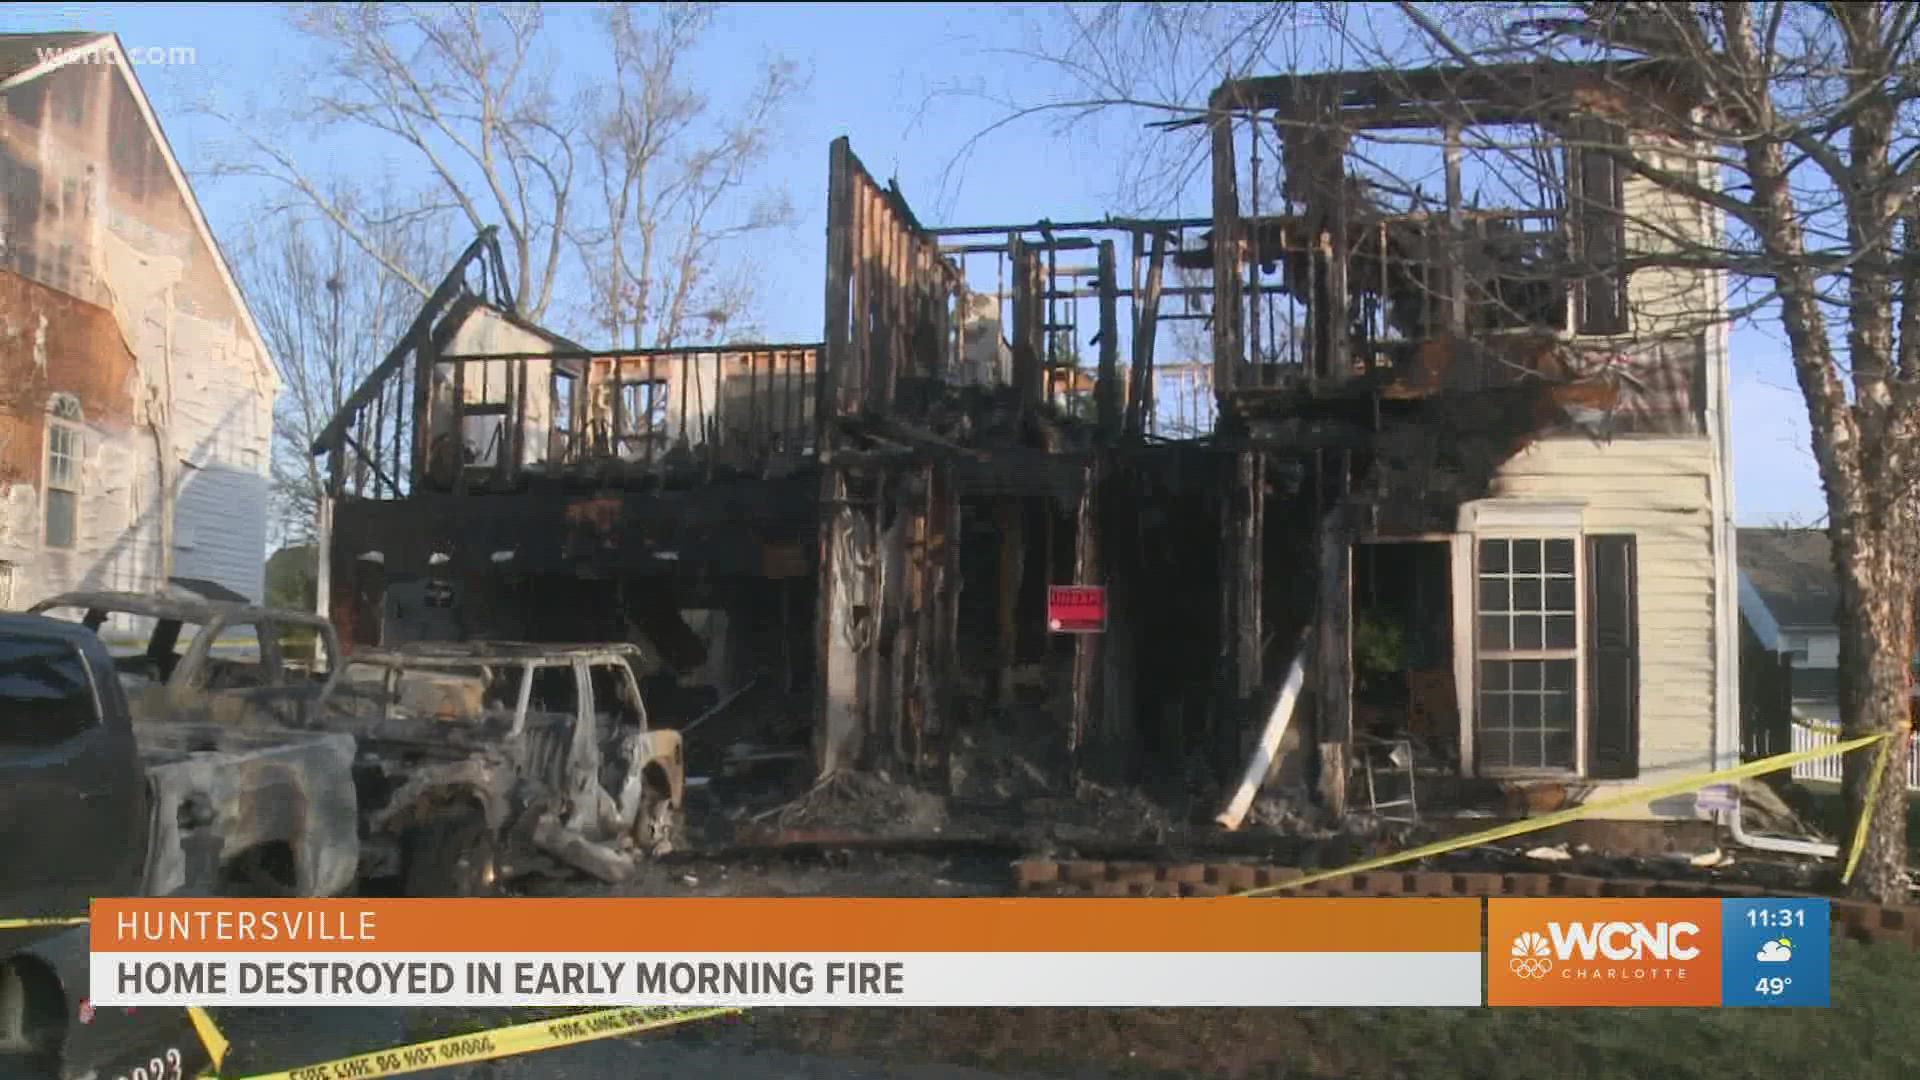 Fire destroys Huntersville home, 3 vehicles in driveway | wcnc.com